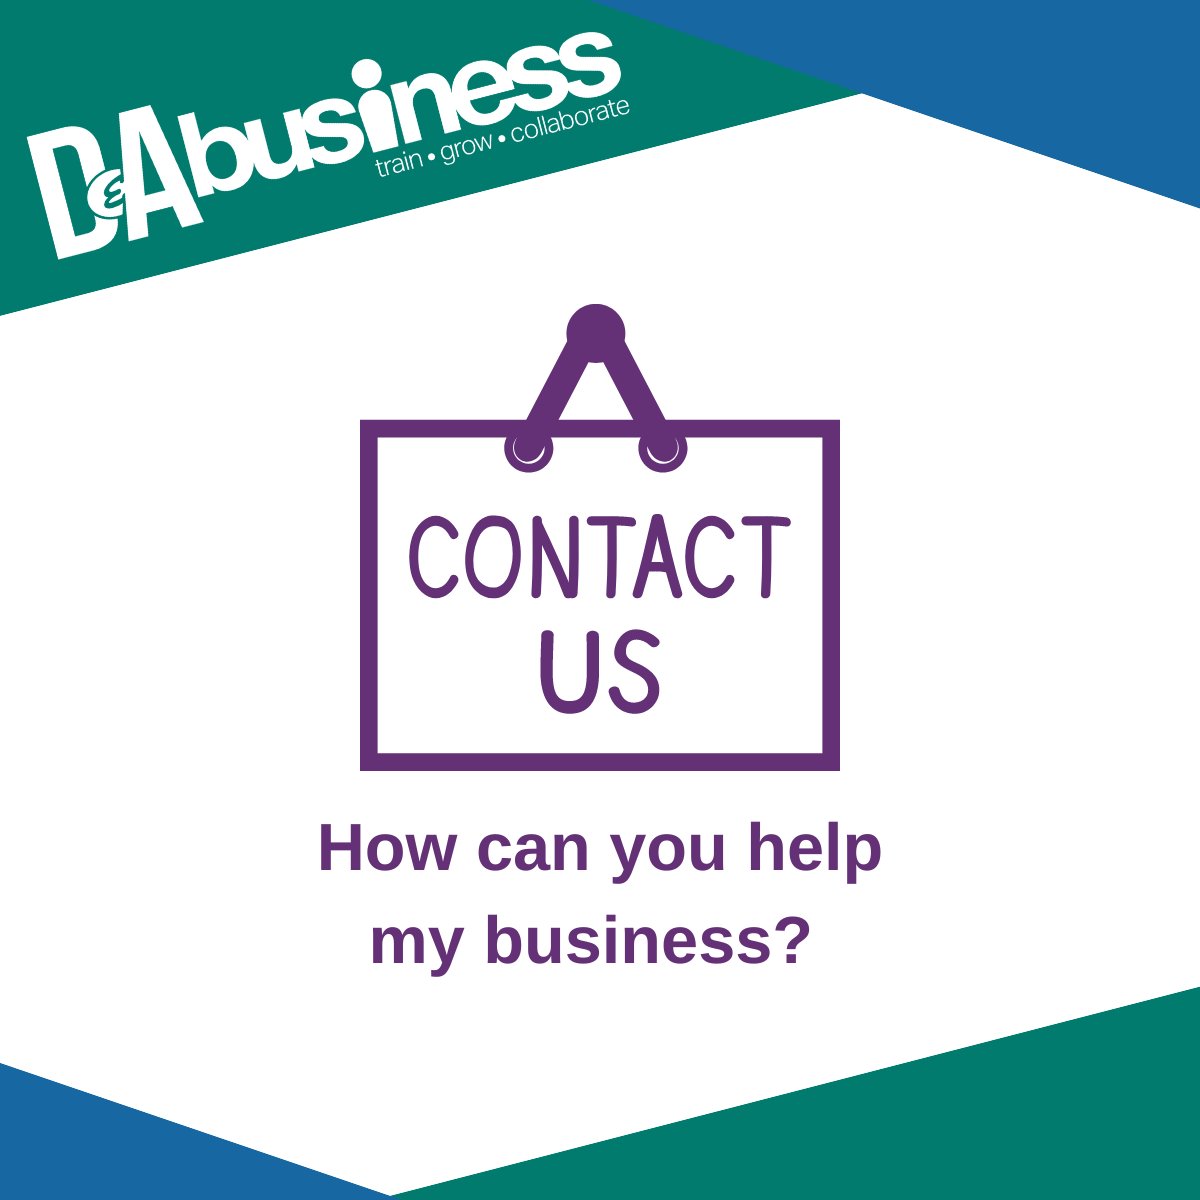 Do you know how we can help your business? 🤔 Simply contact us and we would be happy to discuss your businesses needs and requirements 👏 Go ahead and contact us today ⬇️ pulse.ly/oiwuzt86td #BusinessGrowth #Upskilling #SkillsGaps #FutureWorkforce #Partnerships